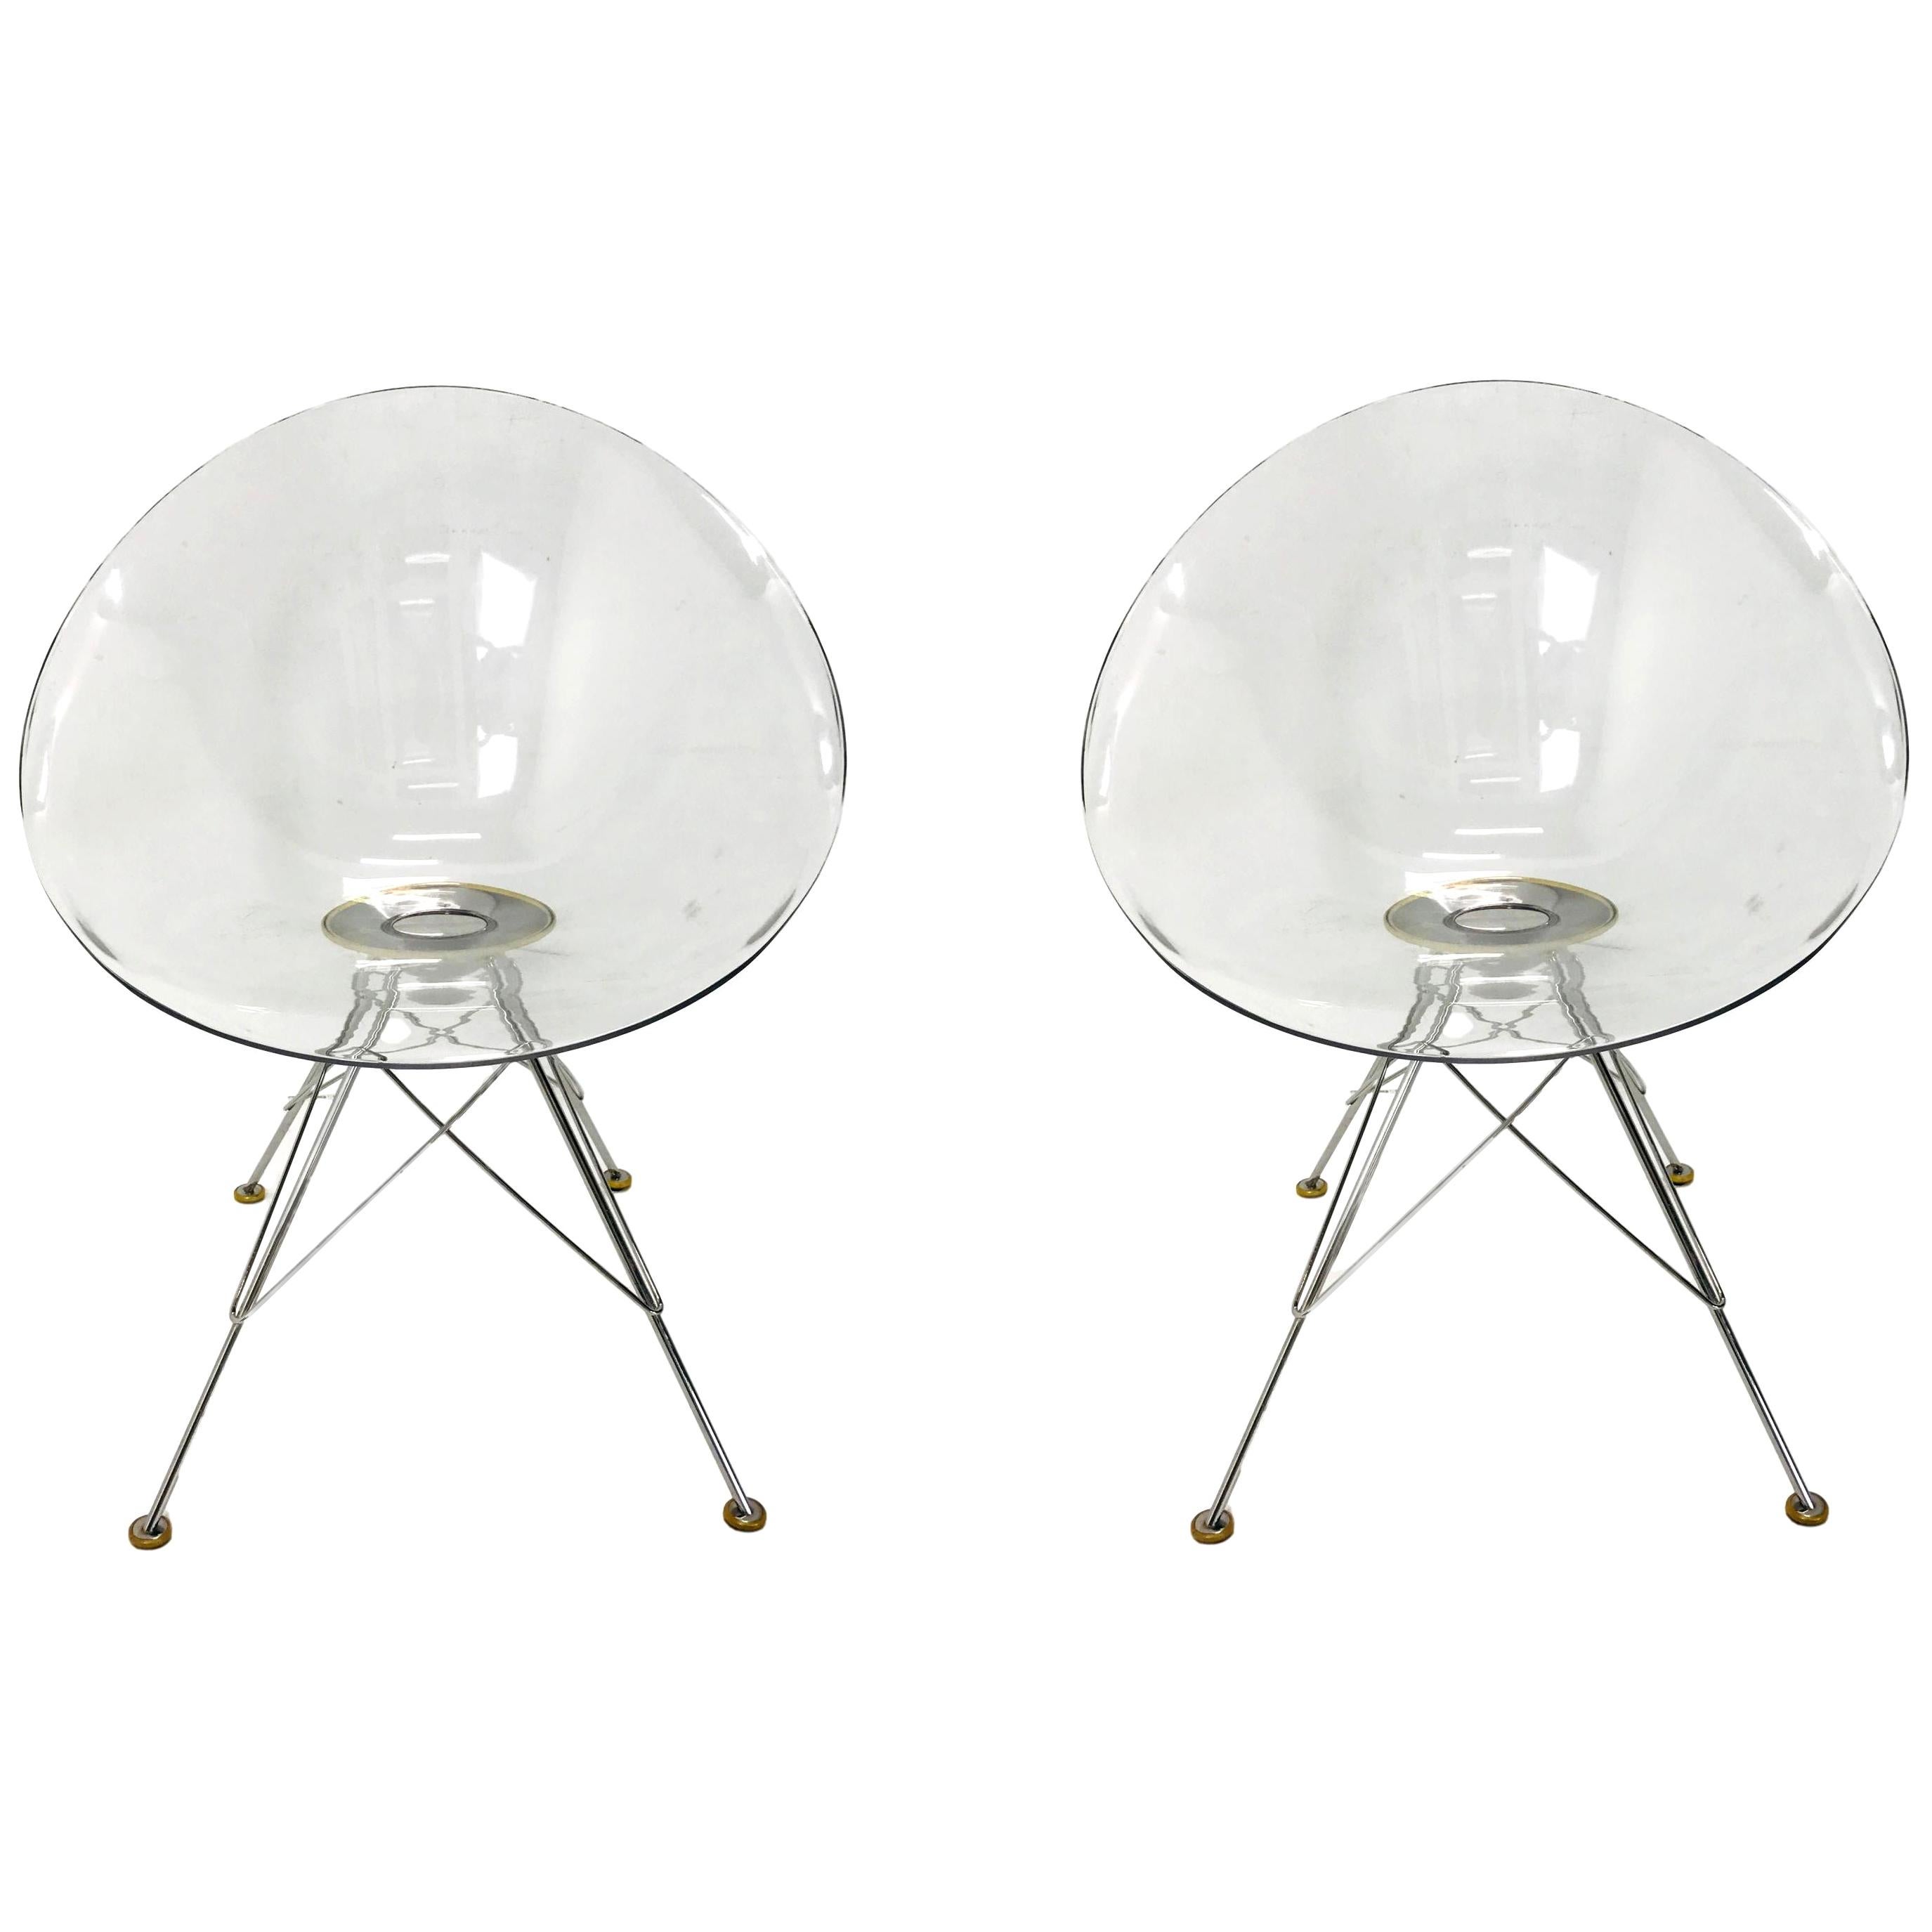 Pair of "Eros" Chairs by Philippe Stark